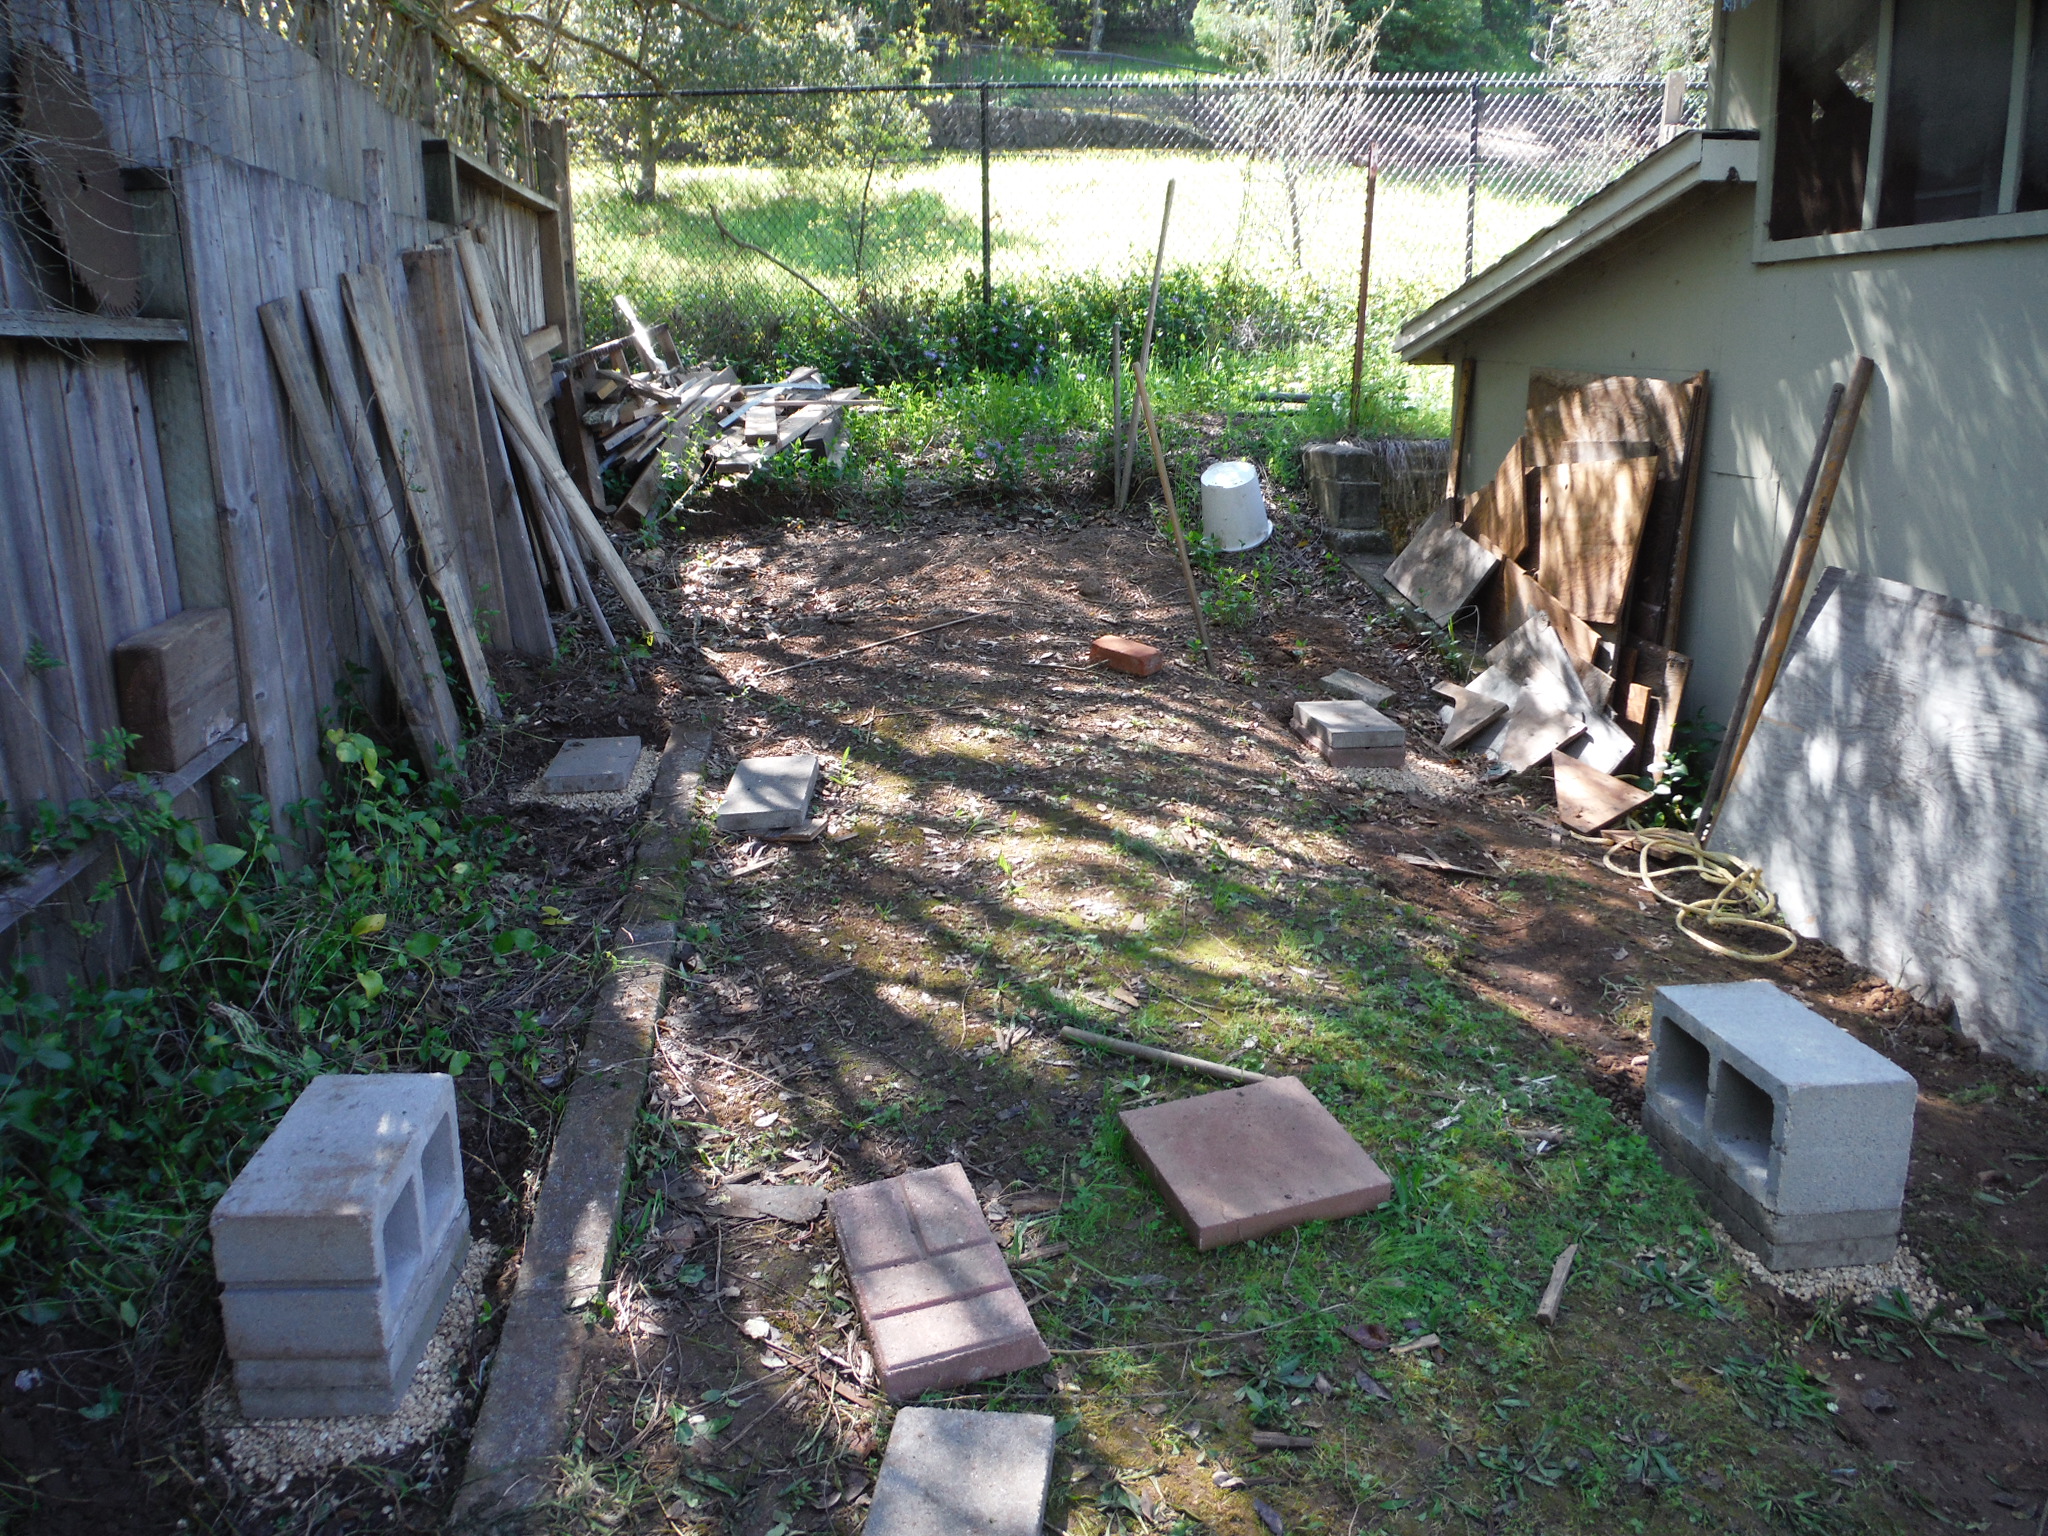 Clearing the area and getting started on the leveling of the cinder blocks.